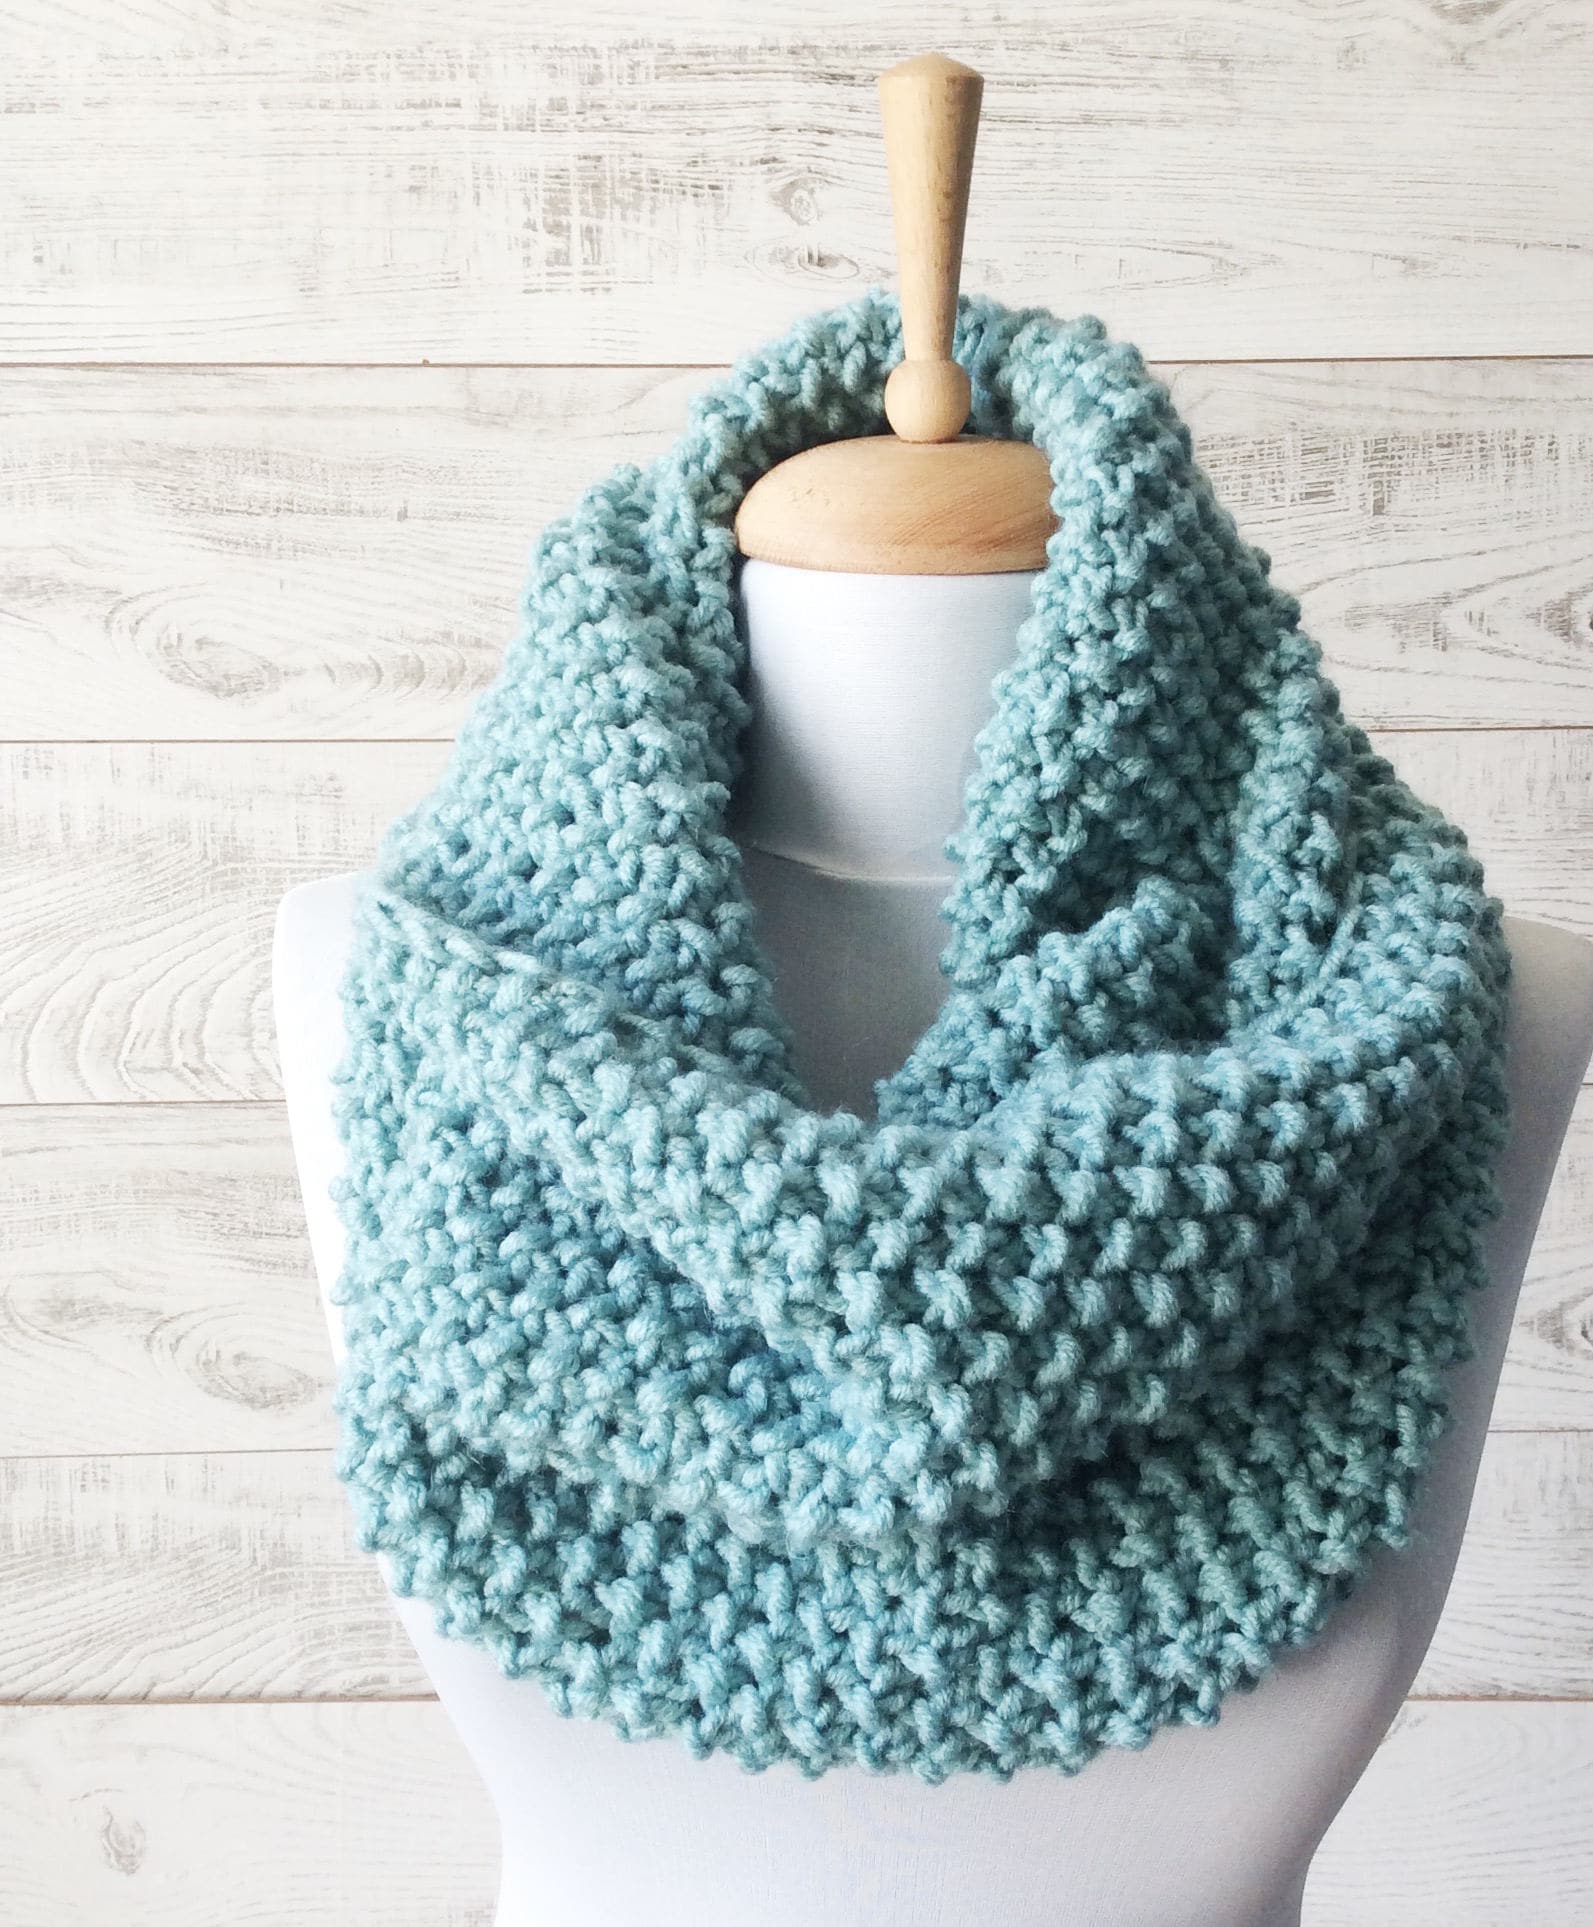 Chunky Knit Scarf Blue Seed Stich Scarf Knit Infinity Scarf Womens Scarves Fall Winter Fashion Knit Cowl  FAST DELIVERY